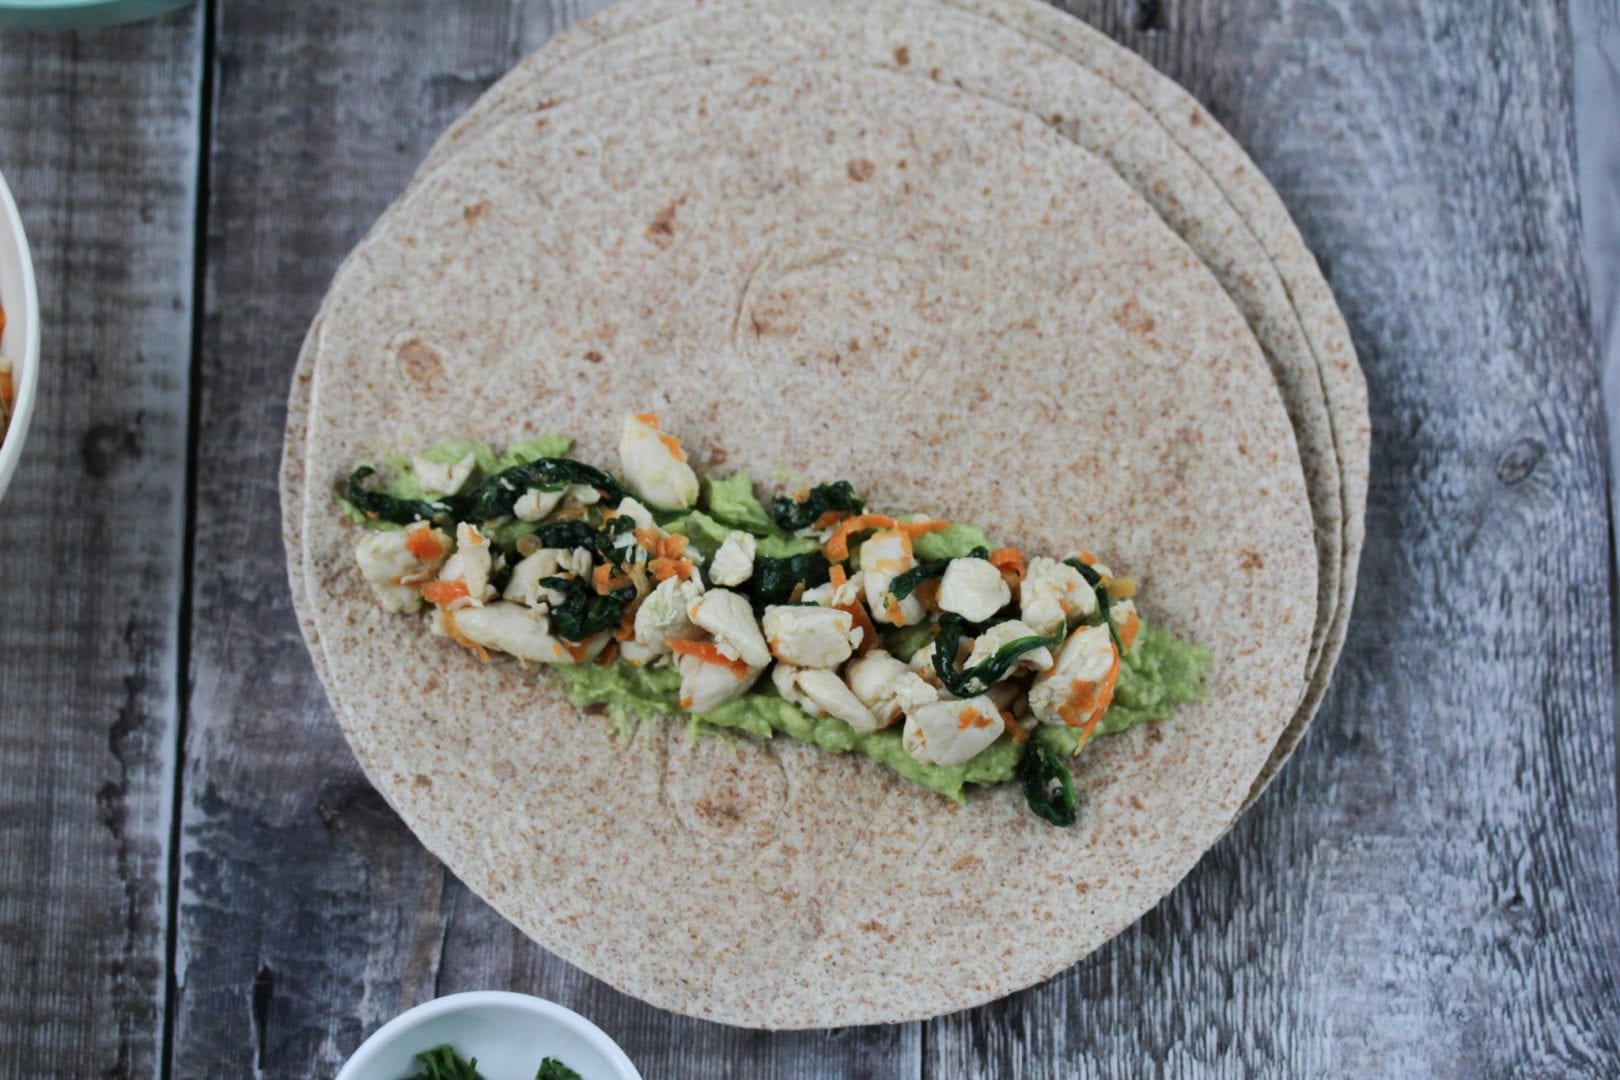 kids wraps - packed lunches - lunch box ideas - chicken wraps